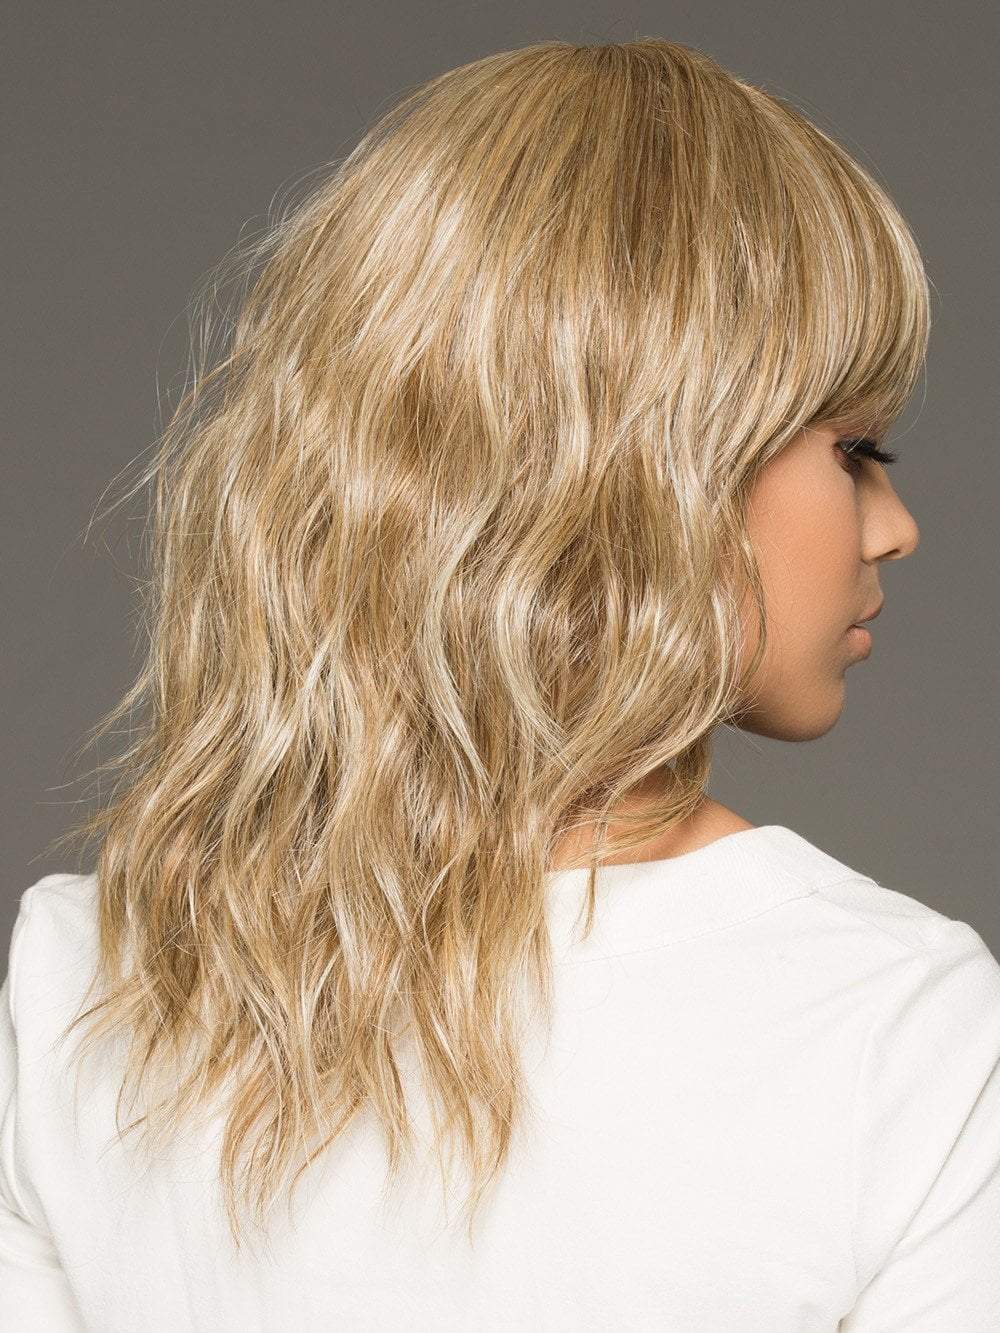 SS14/88 Golden Wheat | Medium Blonde streaked with Pale Gold Blonde highlights and Medium Brown roots